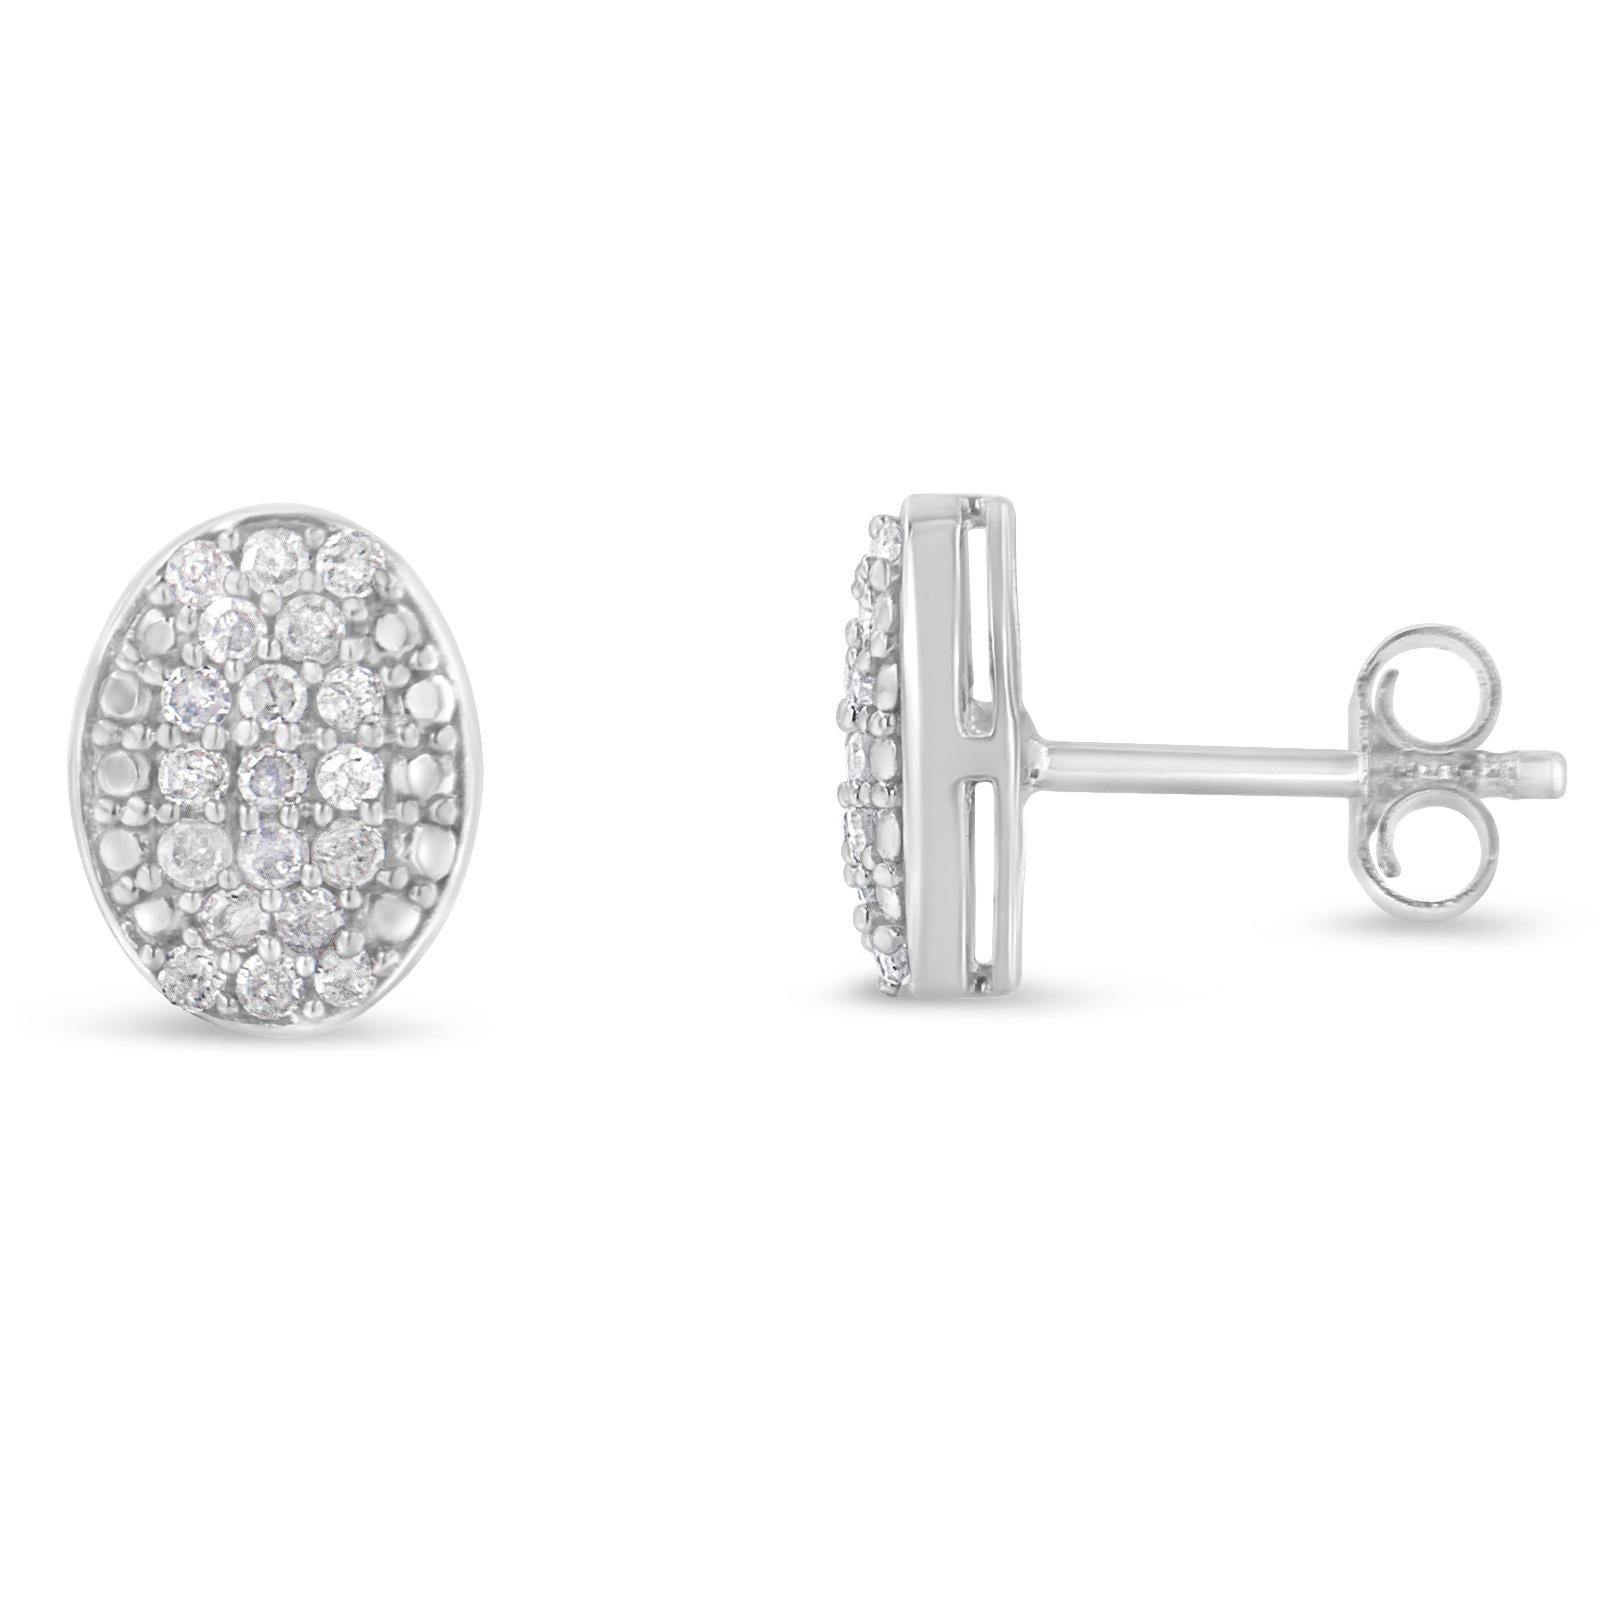 These oval stud cluster earrings are fashioned in cool sterling silver and feature 1/2ct TDW of glittering, promo quality, round cut diamonds. A push back mechanism gives the earrings a secure fit.  Promo quality diamonds are on the lowest of